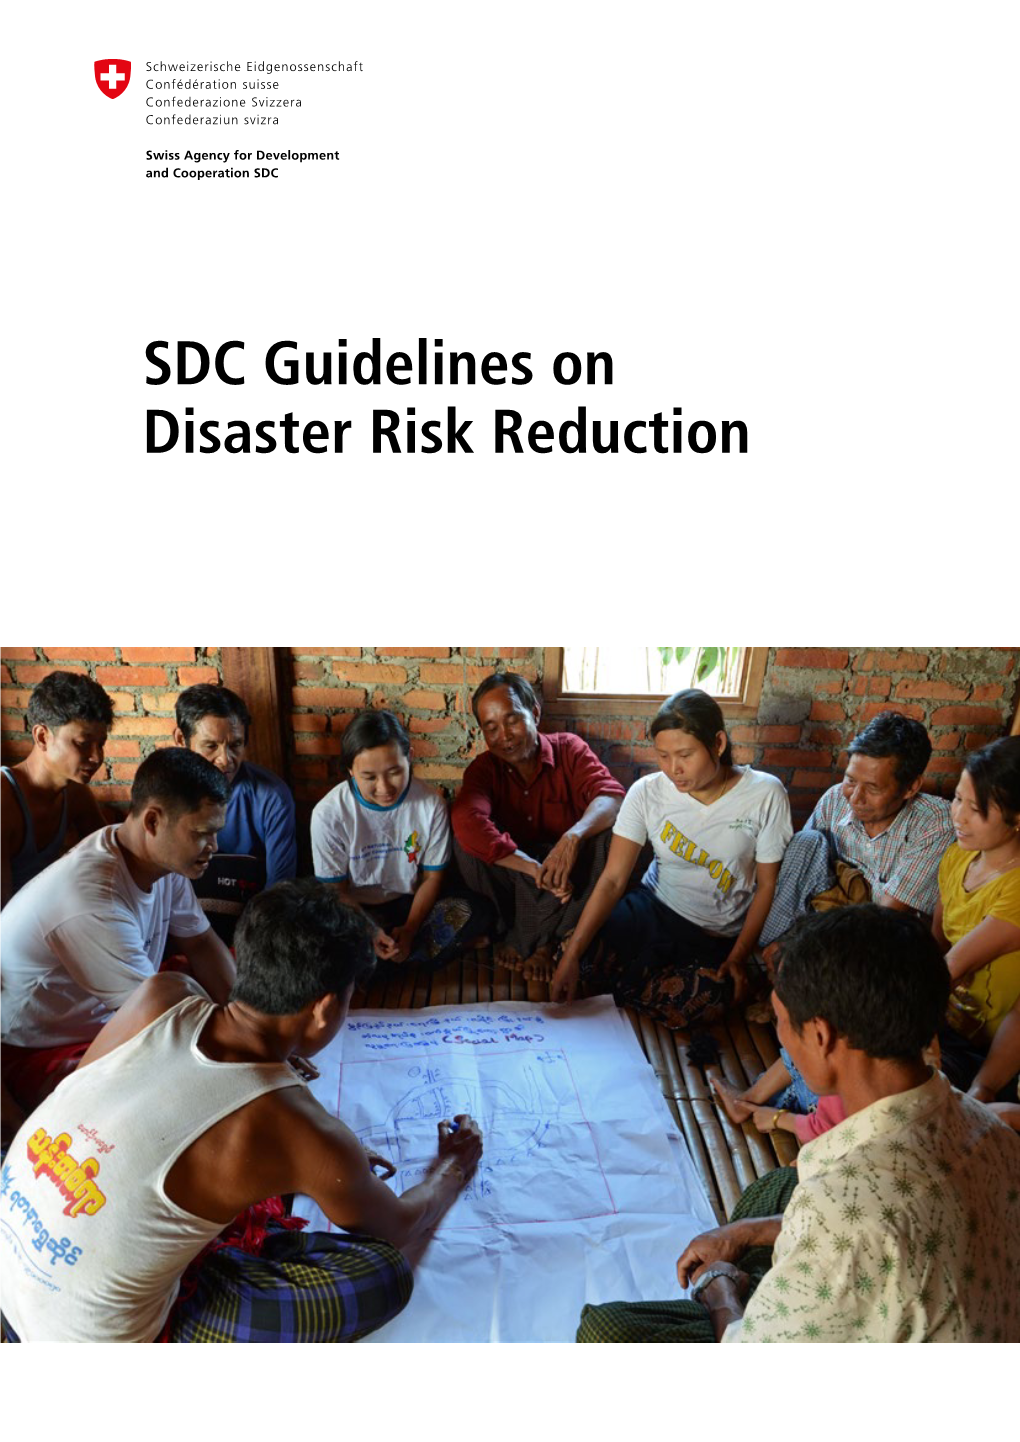 SDC Guidelines on Disaster Risk Reduction